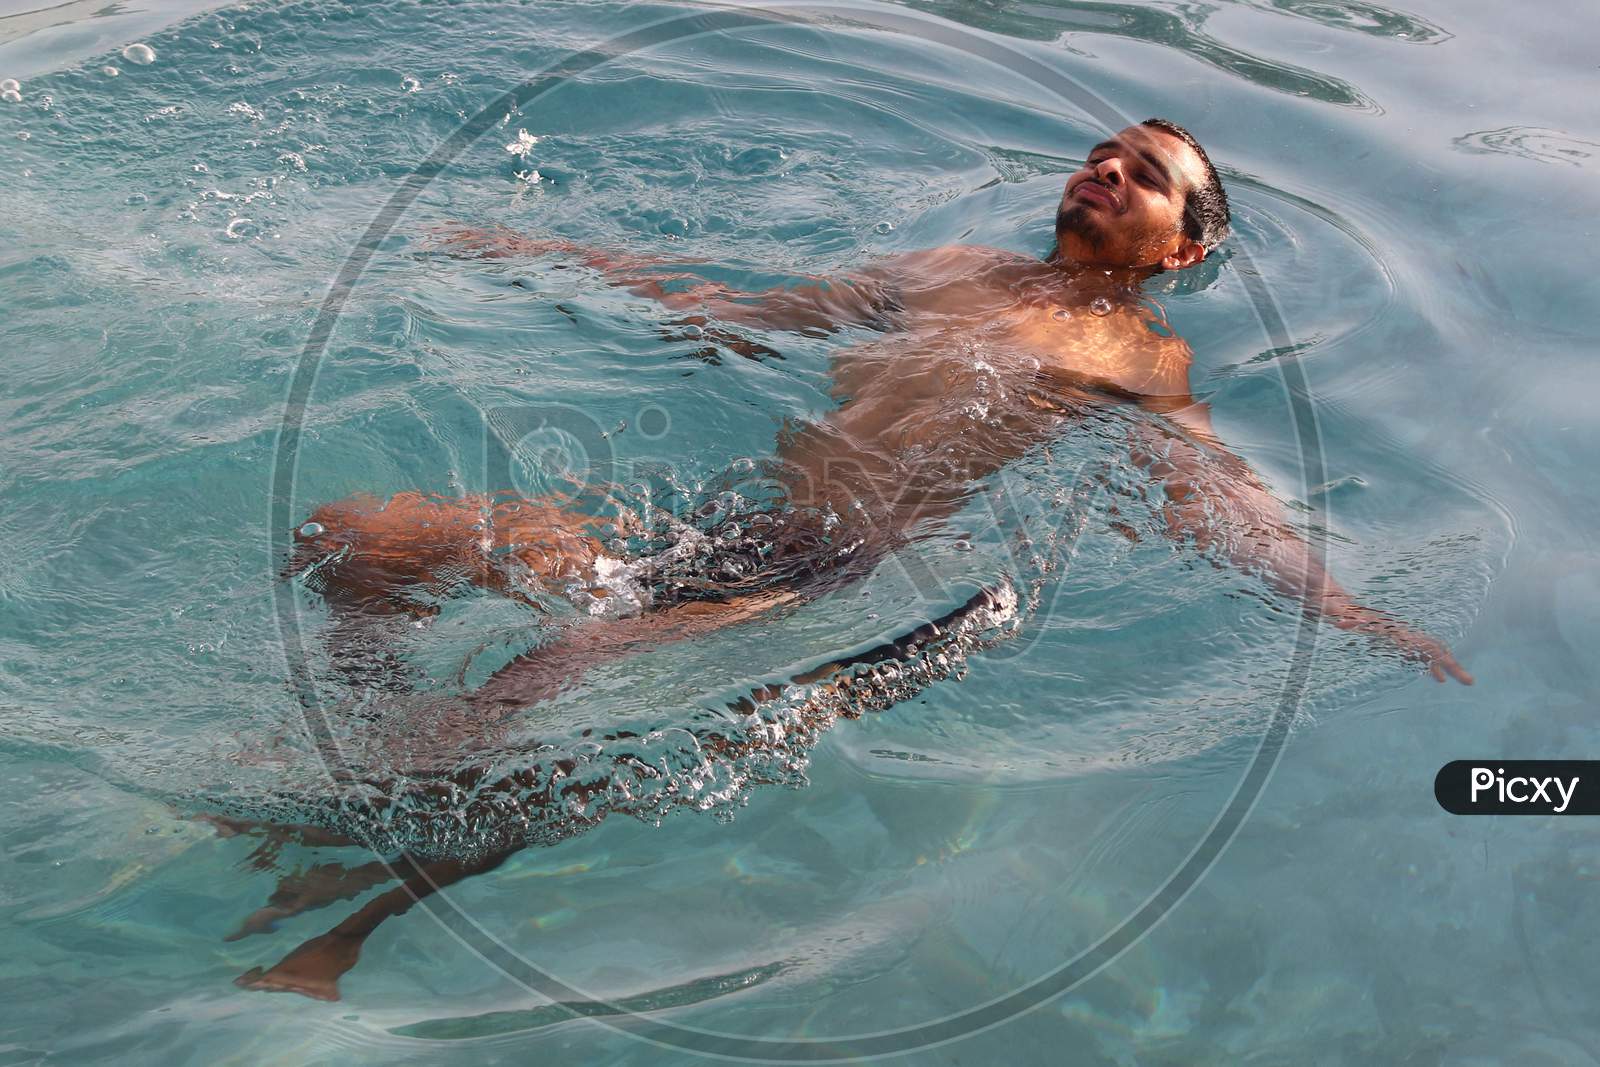 An Indian Man Cools Off Inside a Swimming Pool On A Hot Summer Day In Ajmer, Rajasthan, India On 24 May 2020.